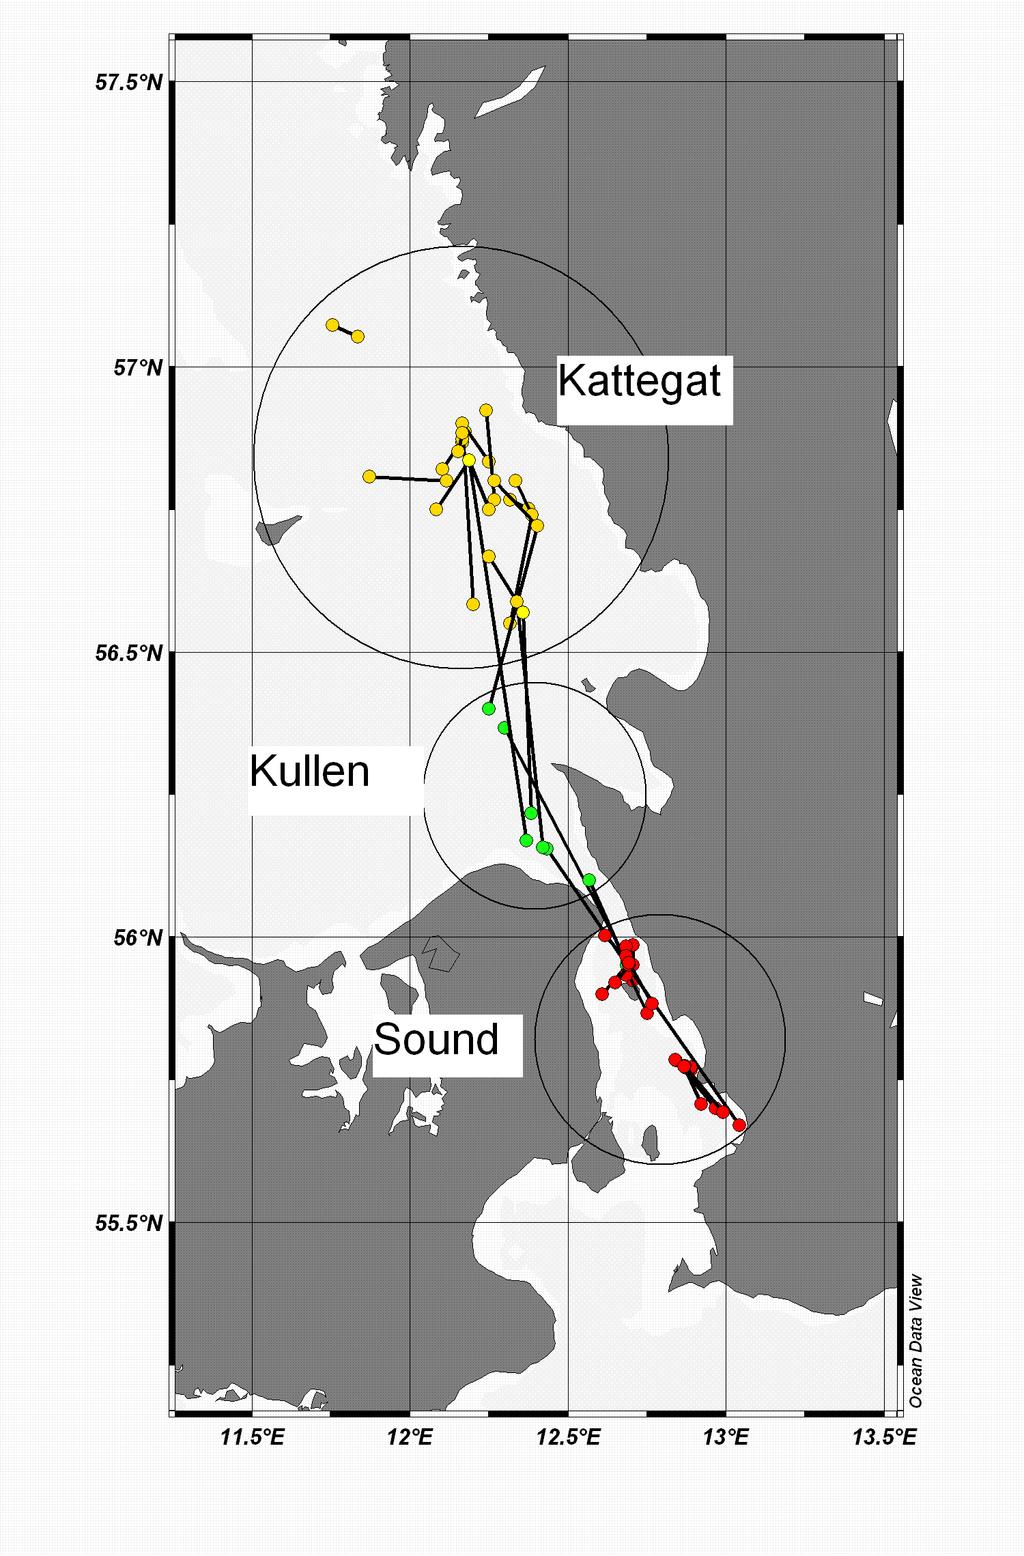 An otolith chemistry study Three putative subpopulations in the Kattegat-Sound were depicted according to their migratory history during